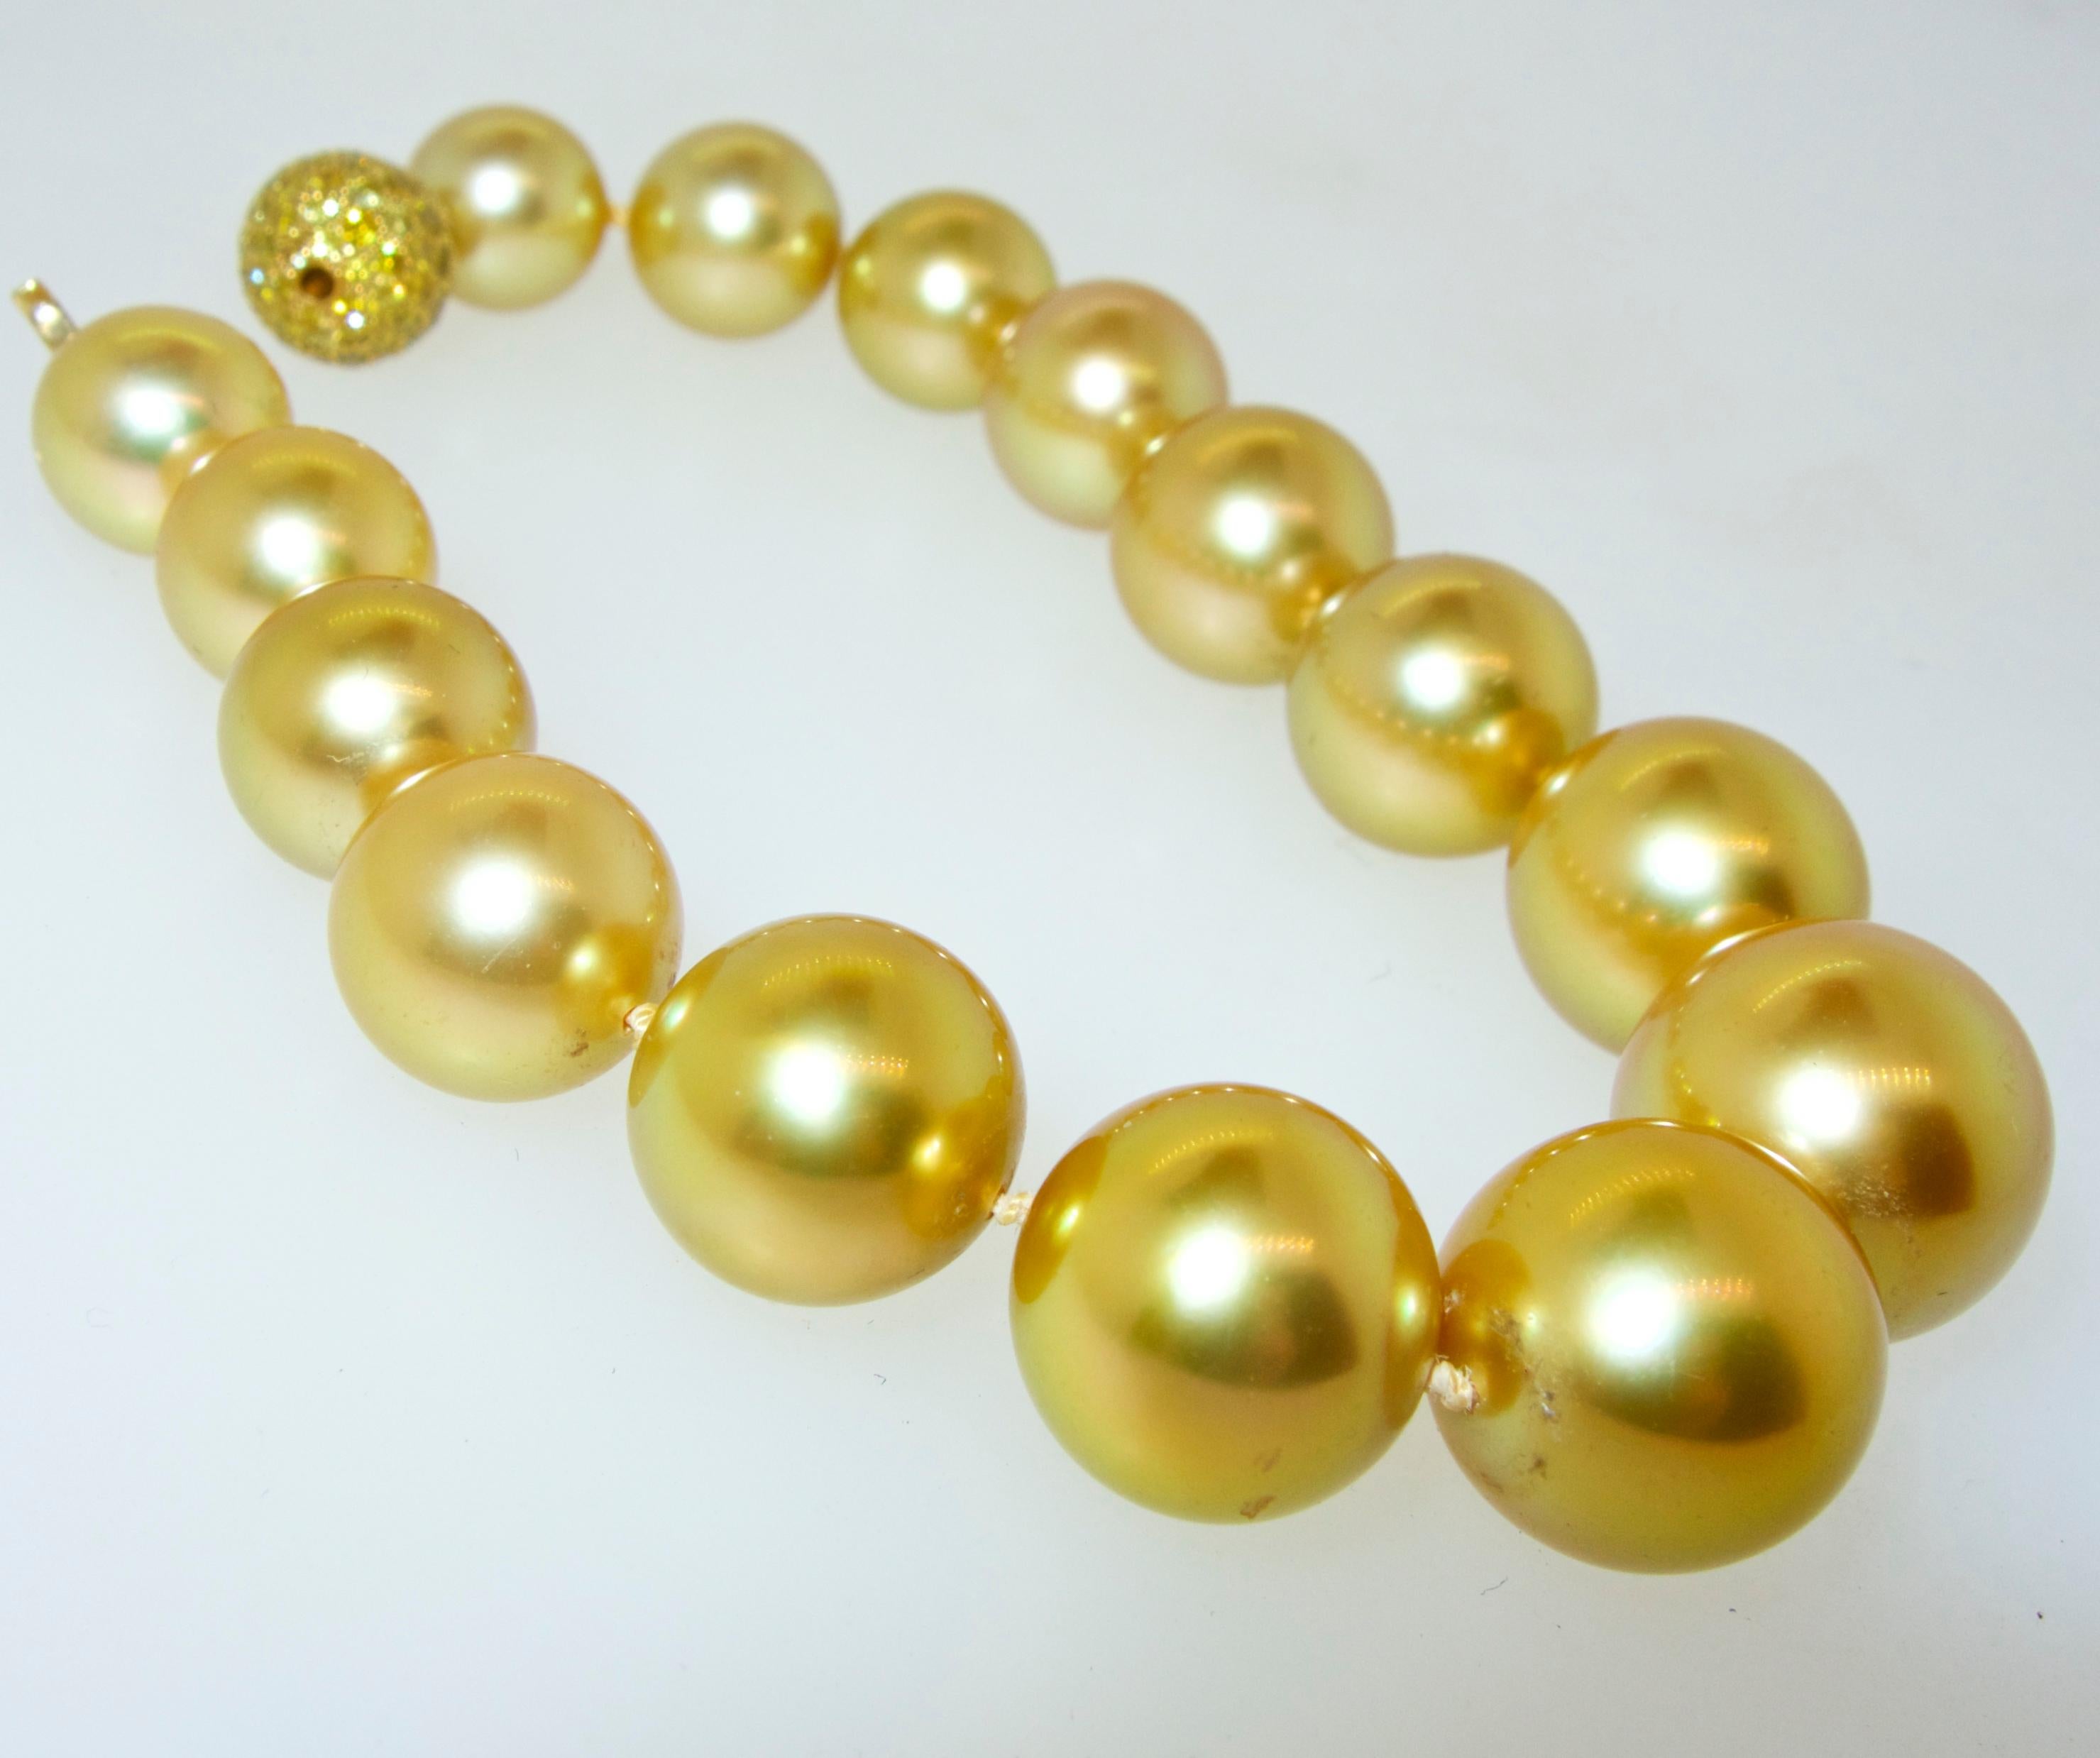 15  true gem  deep golden South Sea pearls slightly graduating in size, from 10.5 up to 14.35 mm.  The color is a vibrant deep gold color, the skins are clean with fine deep luster and these spherical pearls are well matched.   We see many strands